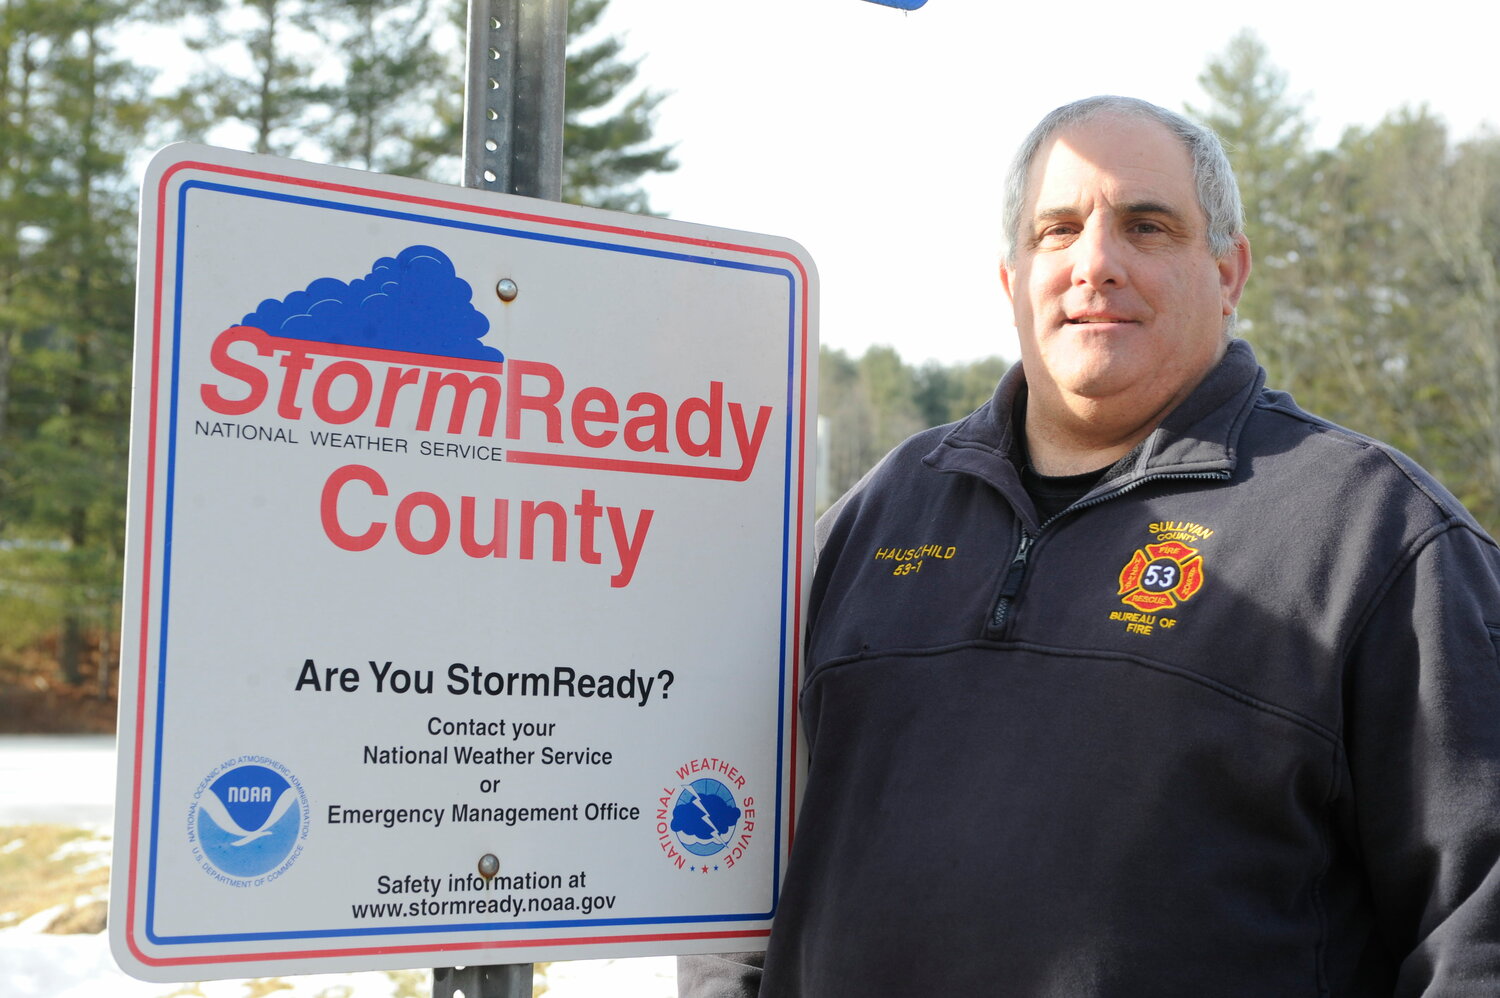 John Hauschild, Sullivan County fire coordinator, is pictured outside the Sullivan County Emergency Services Training Center.